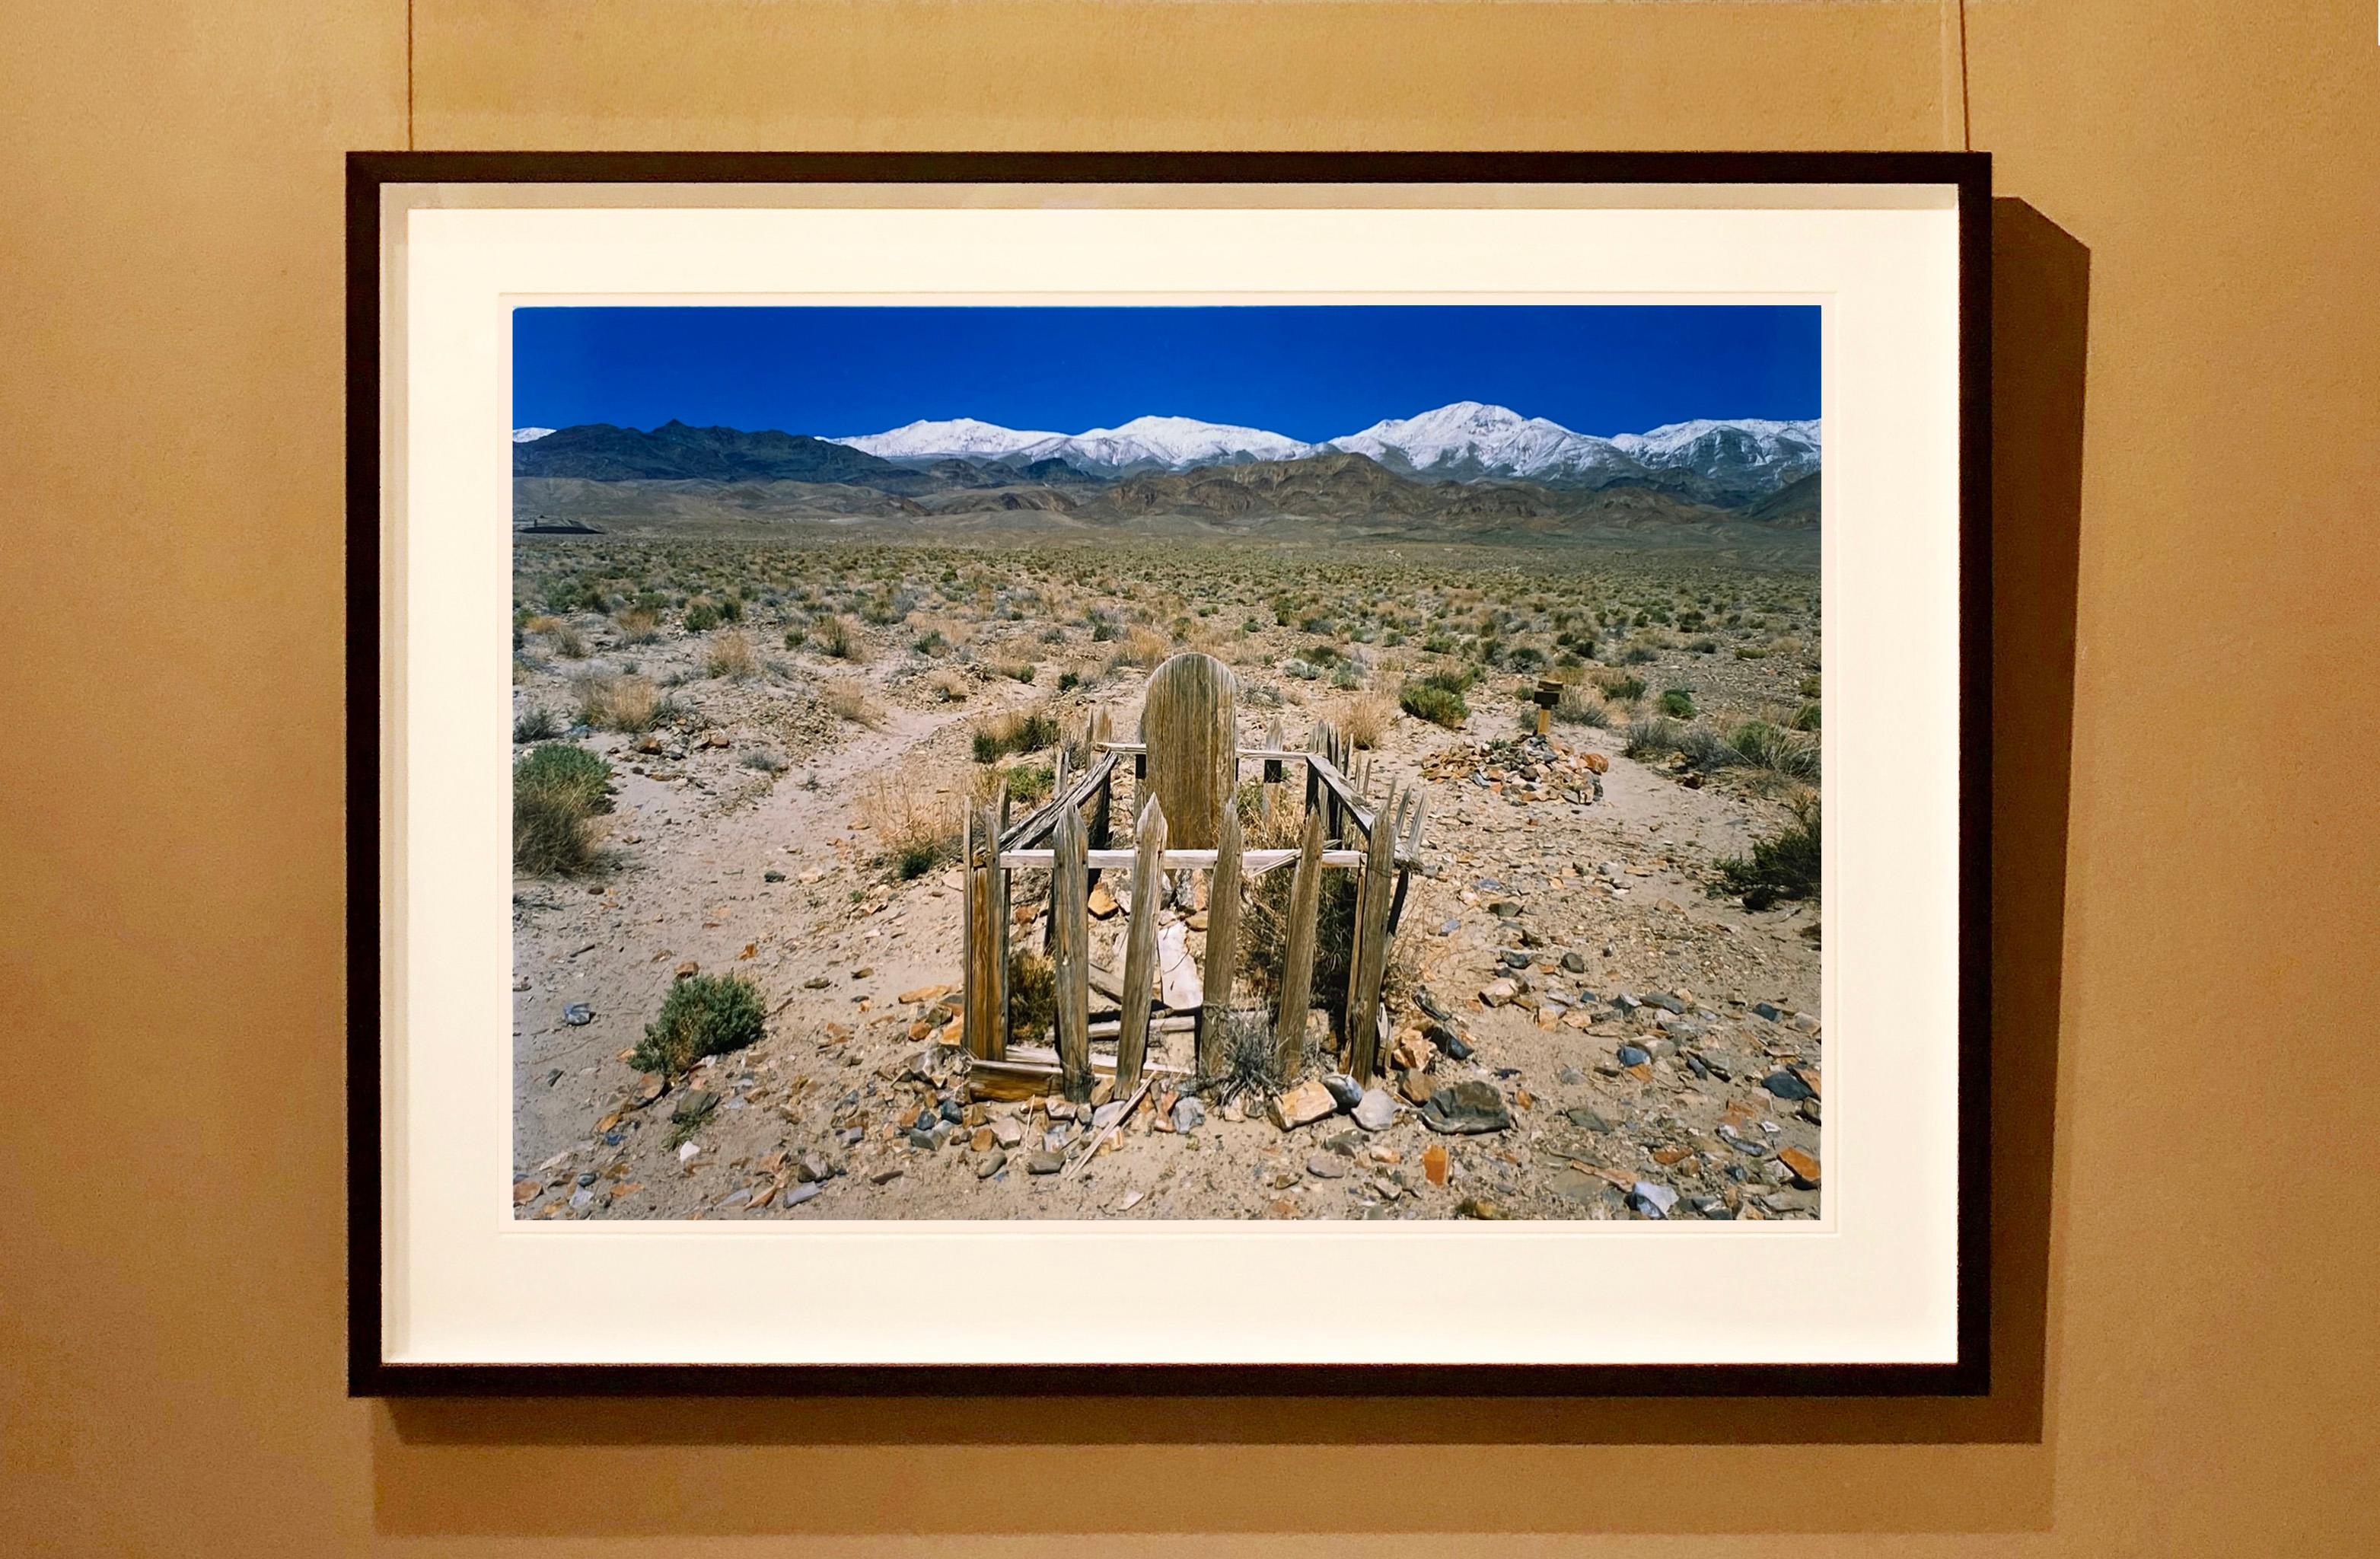 Pioneer's Grave II, Keeler, Inyo County, California - American Landscape Photo - Contemporary Photograph by Richard Heeps